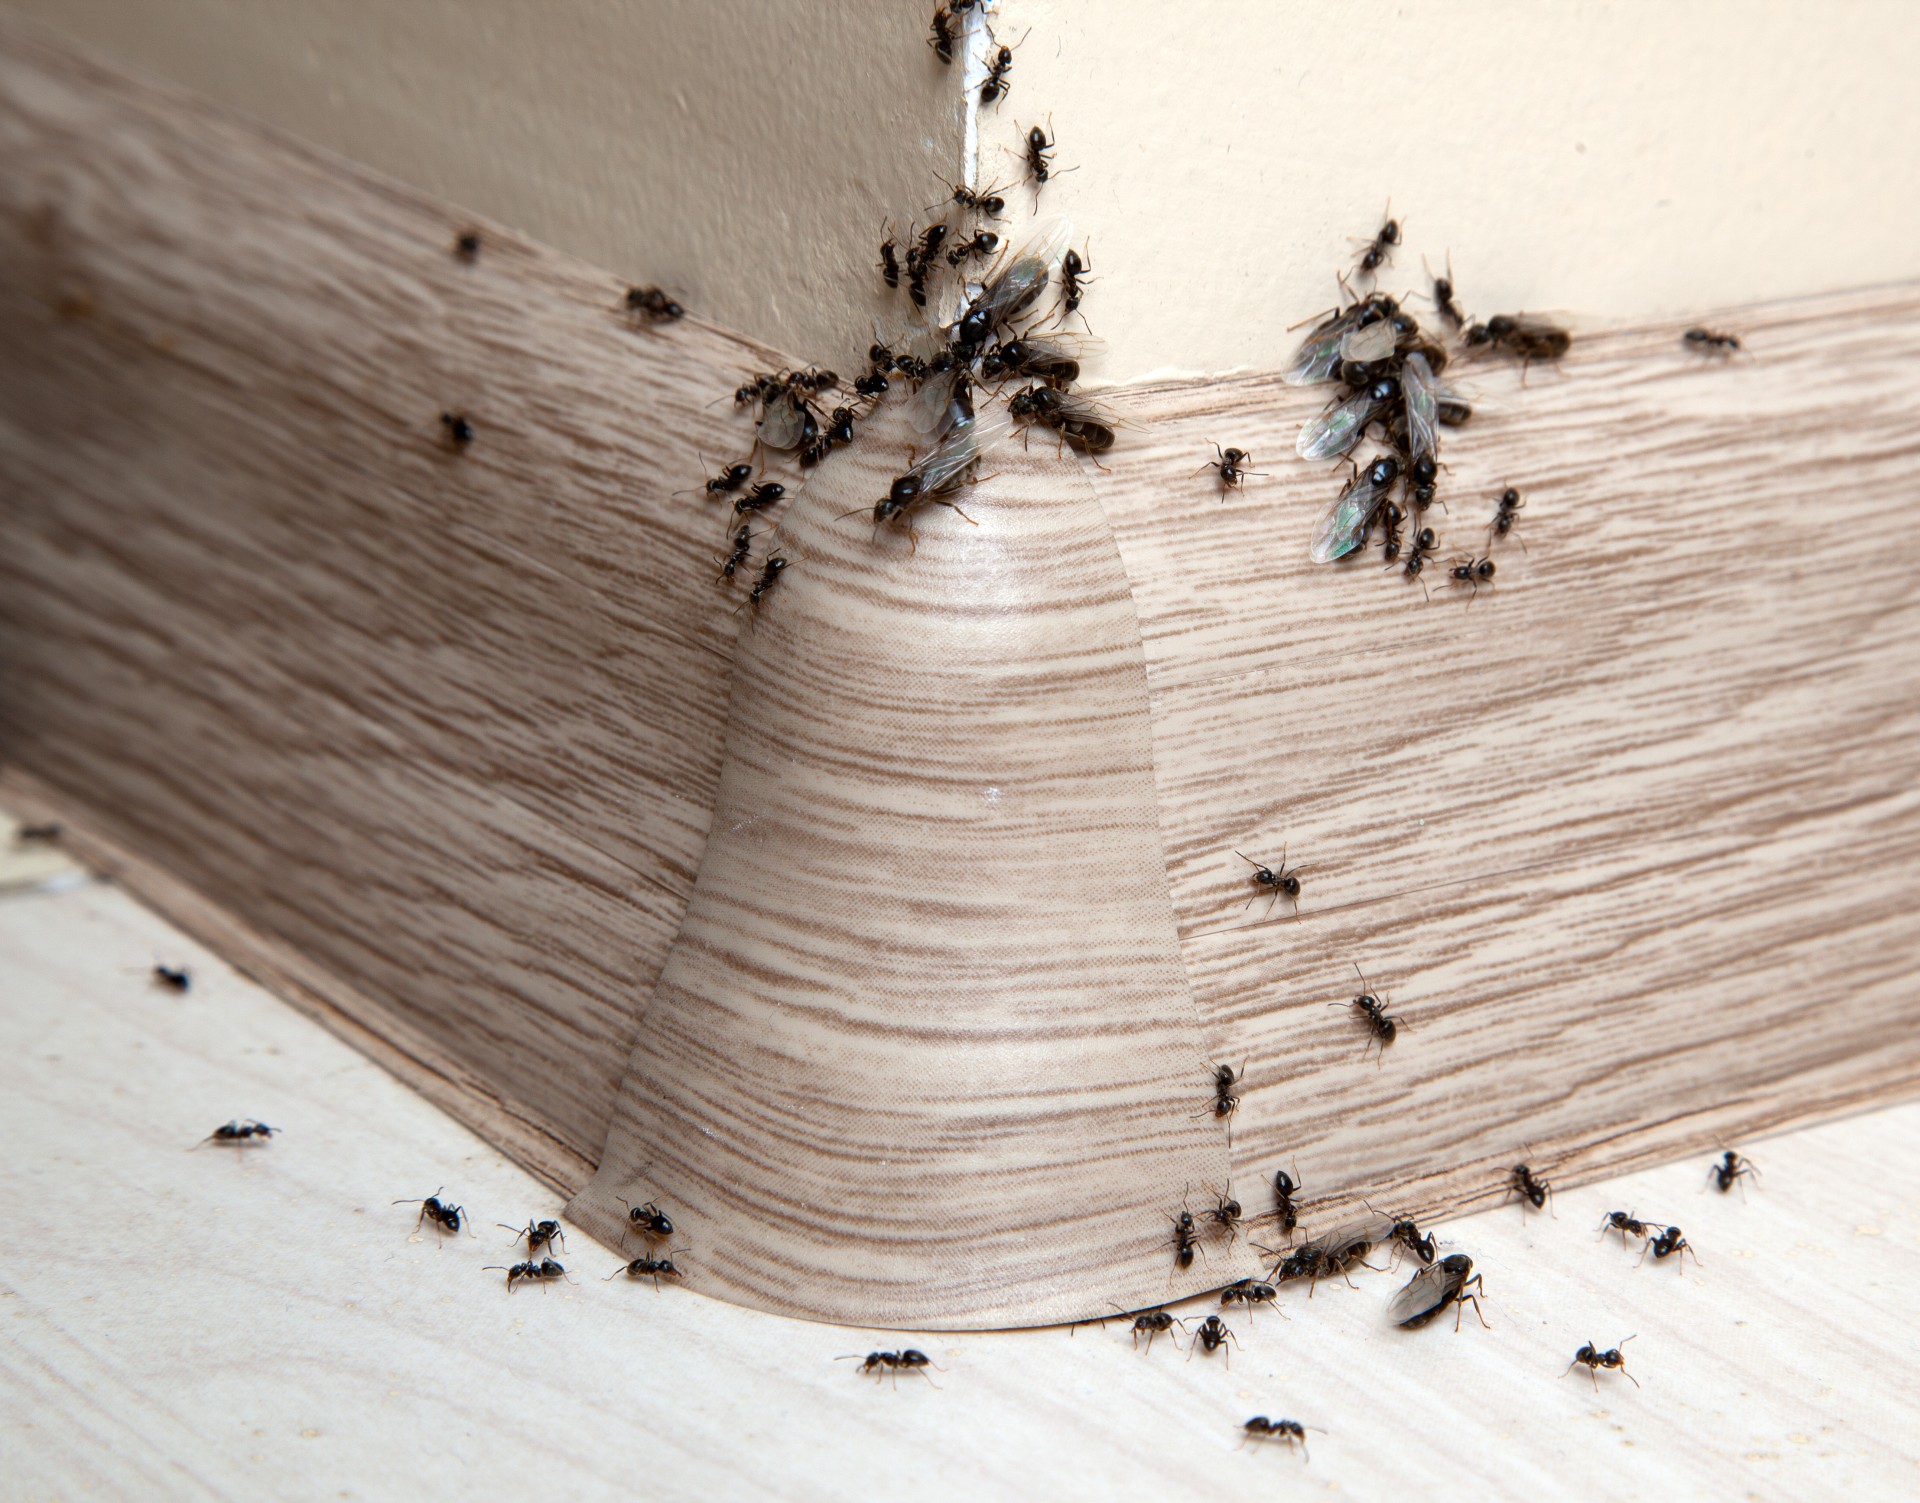 Ant Infestation, Pest Control in Leatherhead, Oxshott, Fetcham, KT22. Call Now 020 8166 9746